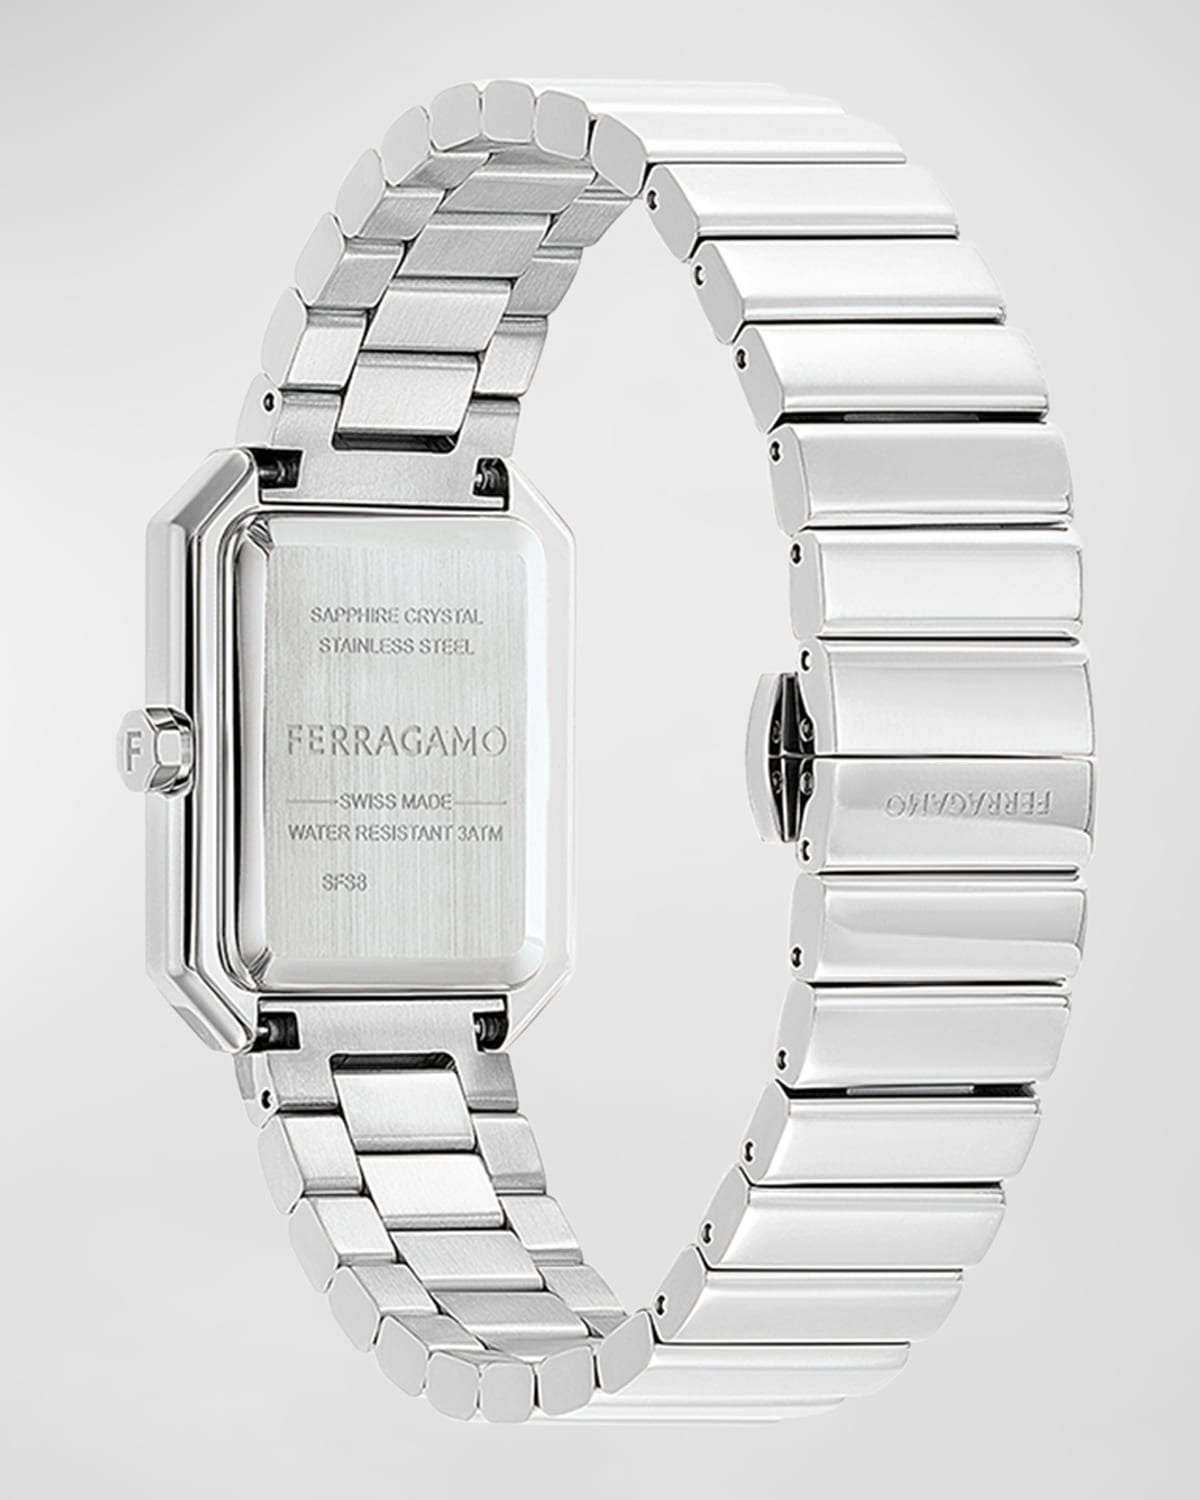 26.5x33.5mm Ferragamo Crystal Watch with Silver Dial, Stainless Steel - 3